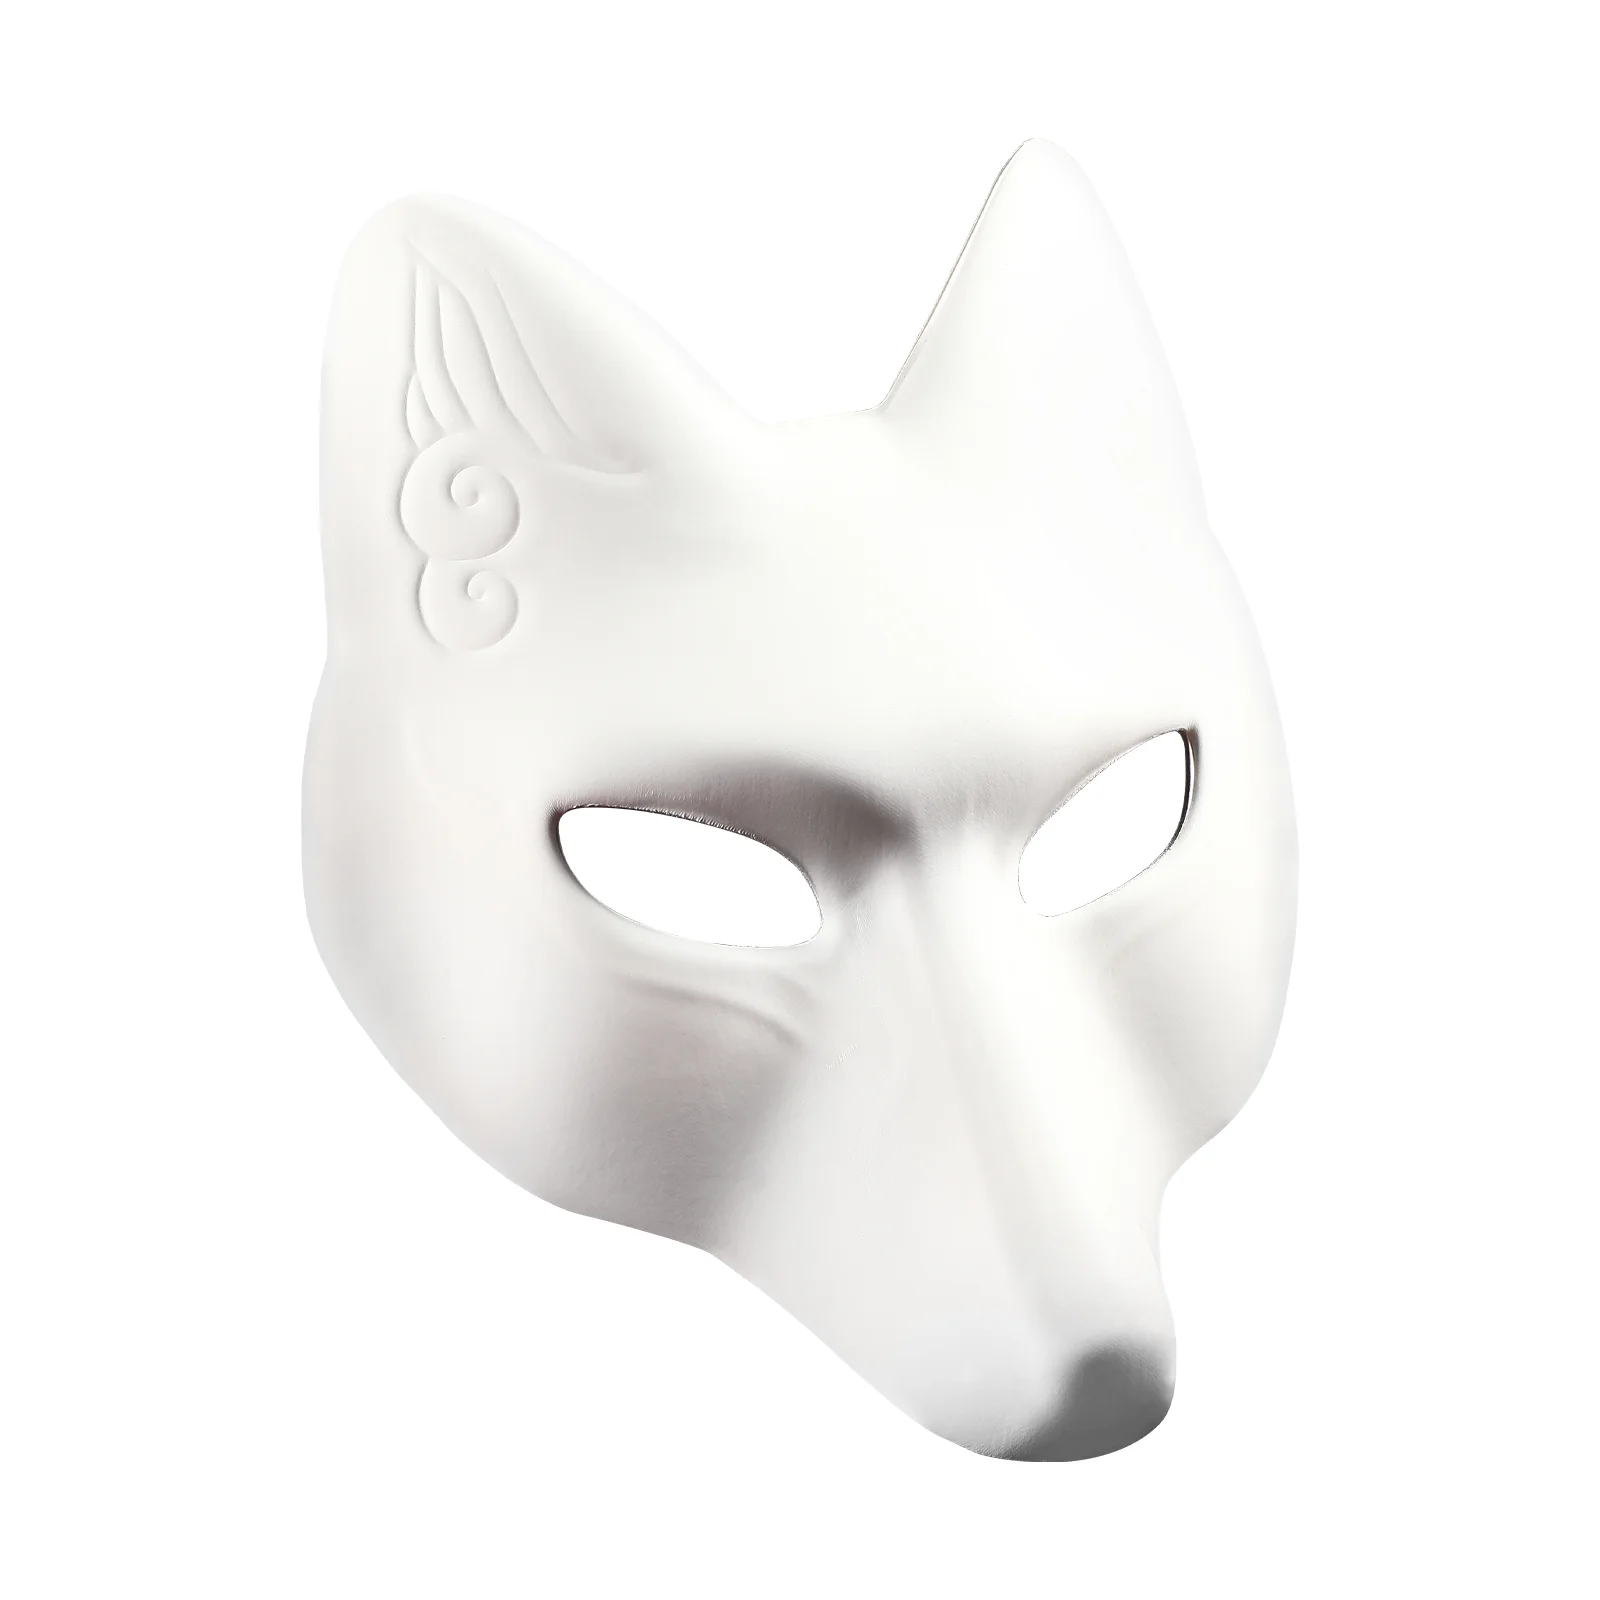 

PRETYZOOM Halloween Blank Mask DIY Unpainted Craft Mask for Cosplay Masquerade Parties Costume Accessory (White) Therian cat